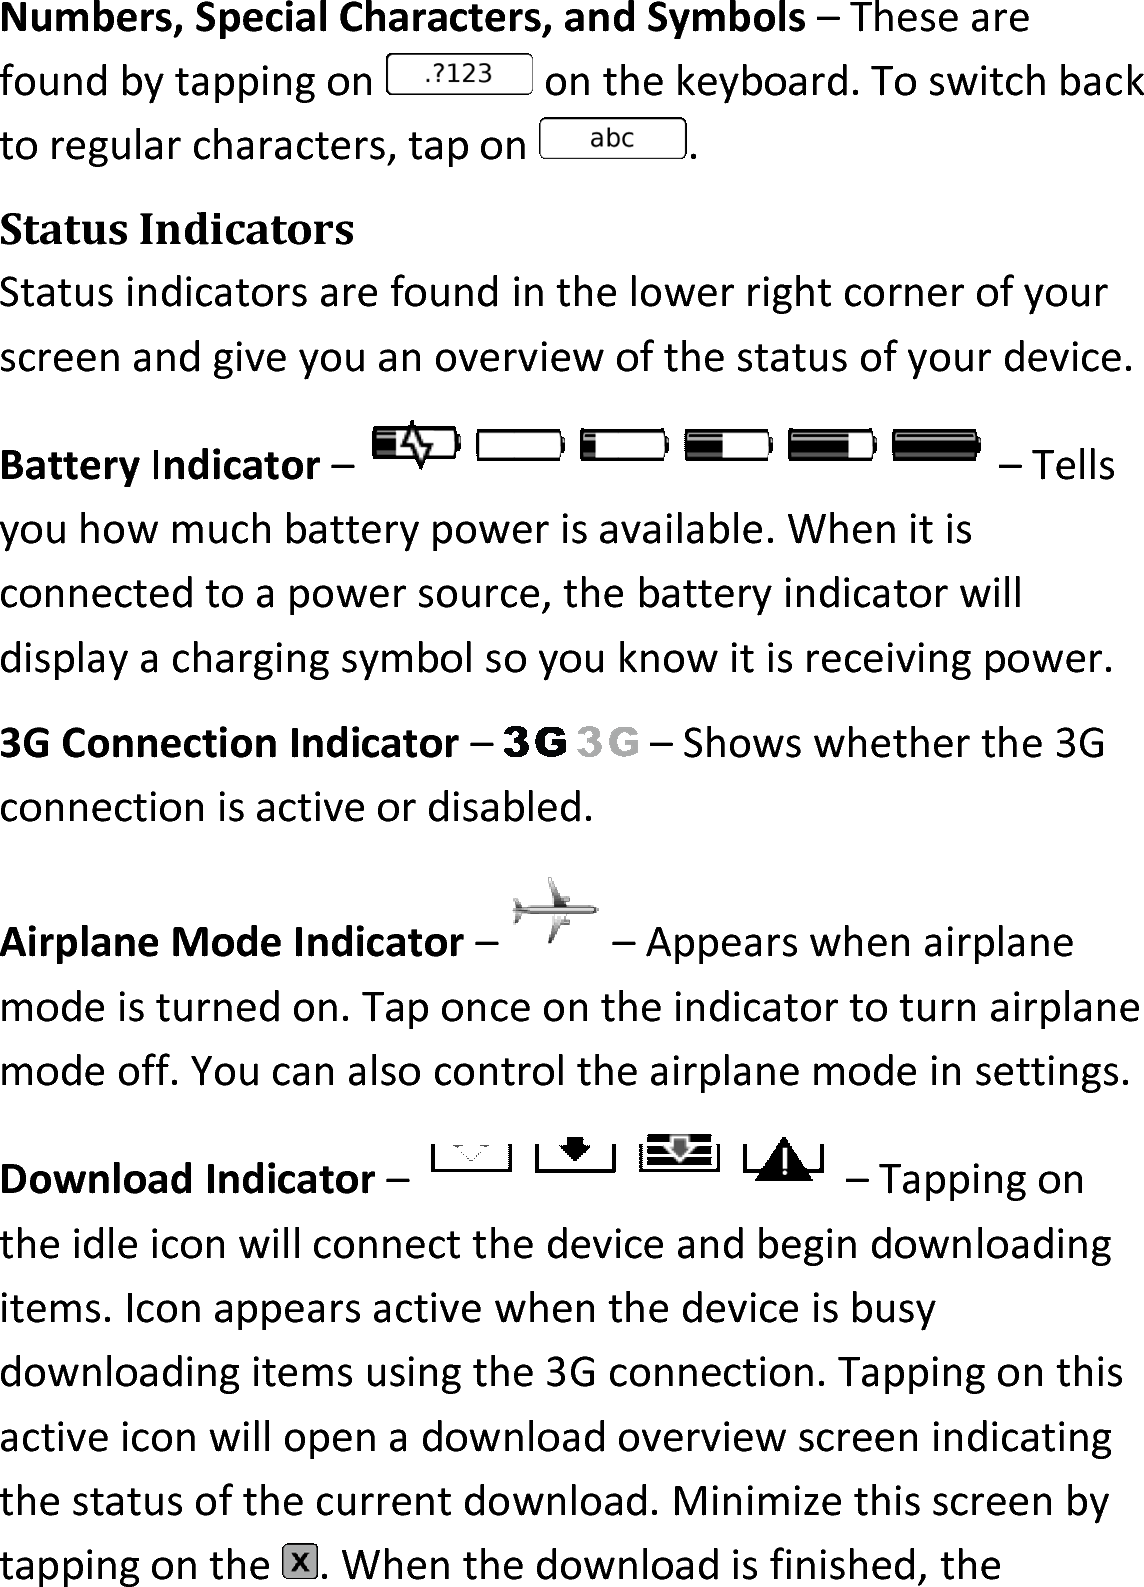 Numbers, Special Characters, and Symbols – These are found by tapping on   on the keyboard. To switch back to regular characters, tap on .Status IndicatorsStatus indicators are found in the lower right corner of your screen and give you an overview of the status of your device. Battery Indicator – – Tells you how much battery power is available. When it is connected to a power source, the battery indicator will display a charging symbol so you know it is receiving power.3G Connection Indicator – – Shows whether the 3G connection is active or disabled.Airplane Mode Indicator – – Appears when airplane mode is turned on. Tap once on the indicator to turn airplane mode off. You can also control the airplane mode in settings.Download Indicator – – Tapping on the idle icon will connect the device and begin downloading items. Icon appears active when the device is busy downloading items using the 3G connection. Tapping on this active icon will open a download overview screen indicating the status of the current download. Minimize this screen by tapping on the  . When the download is finished, the 